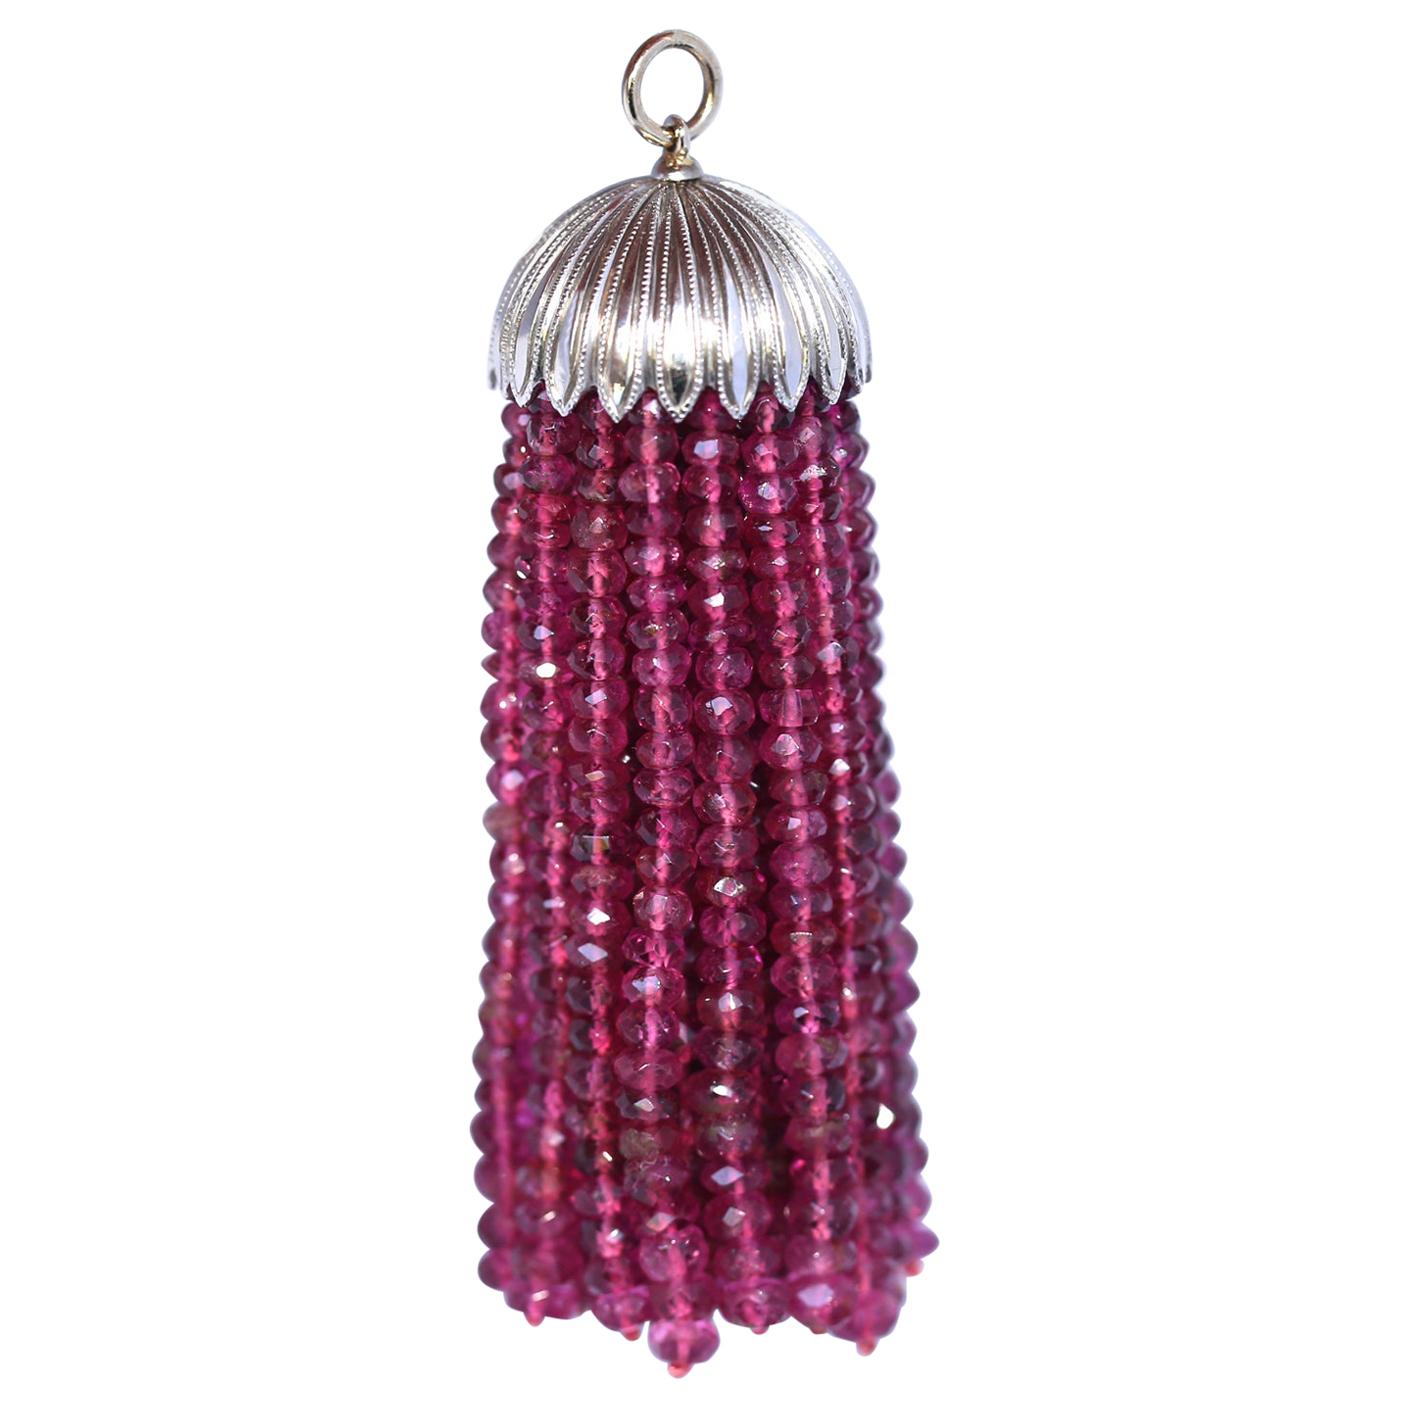 Rubies Beads Pendant Gold Platinum, 1920 For Sale